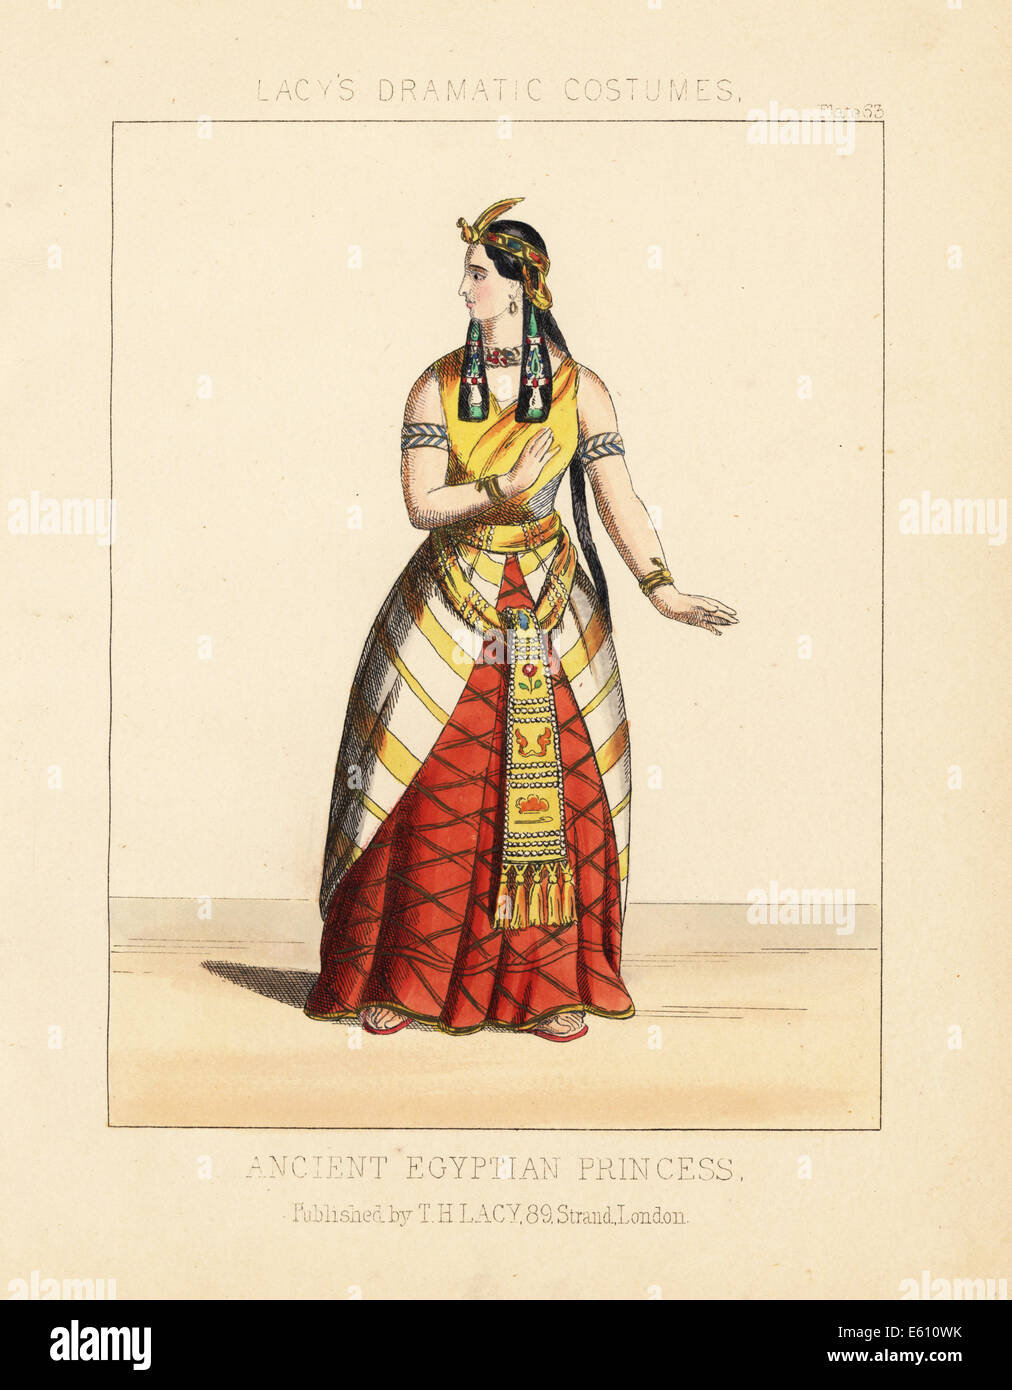 Costume of an ancient Egyptian princess, 19th century. Stock Photo